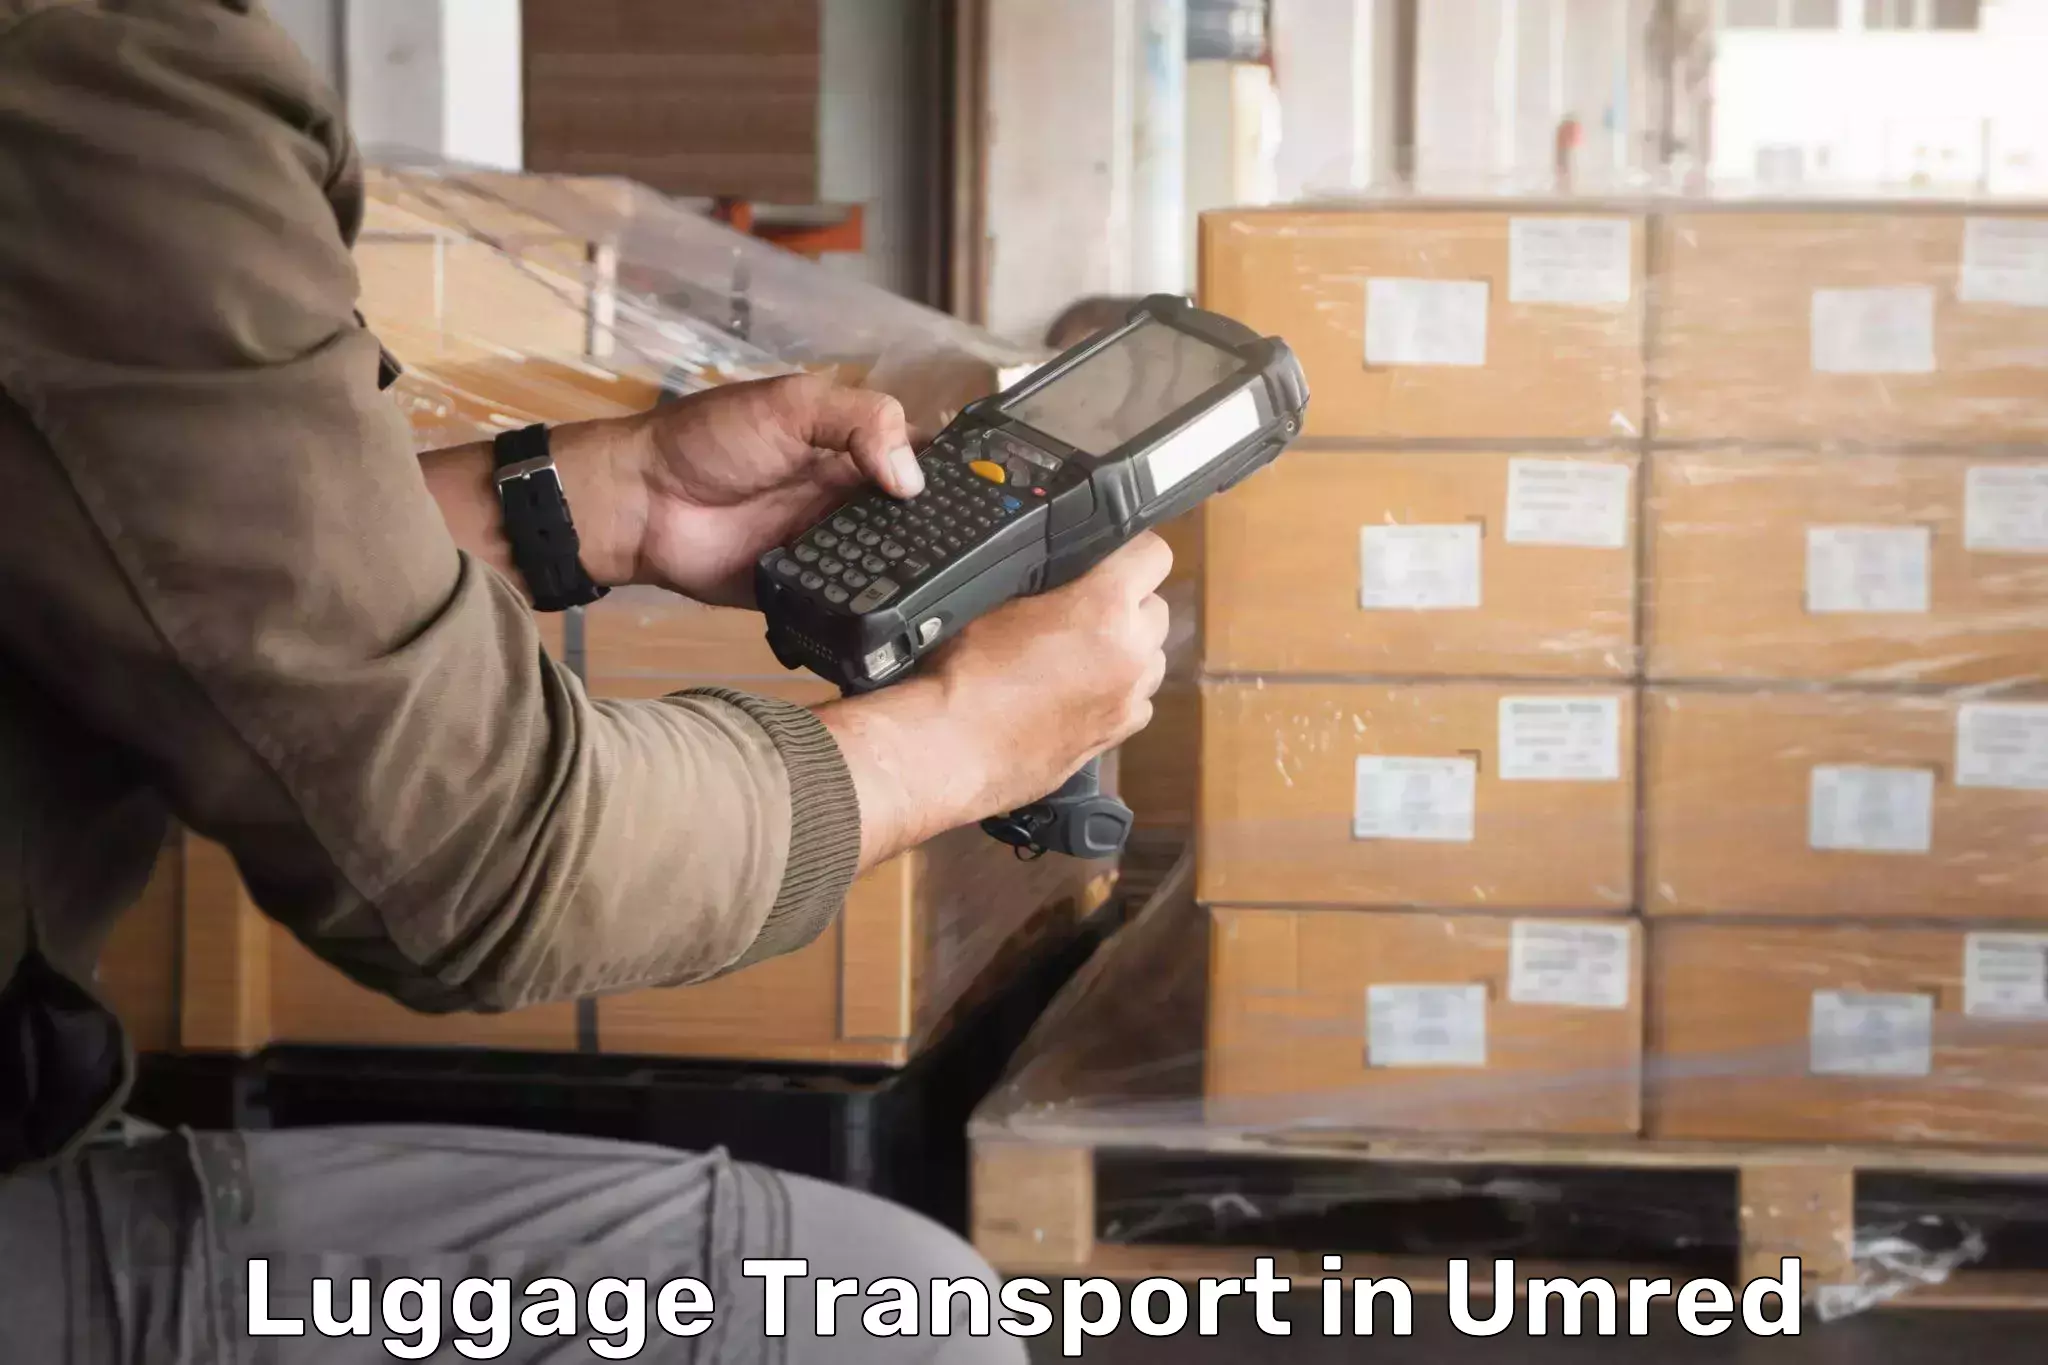 Automated luggage transport in Umred